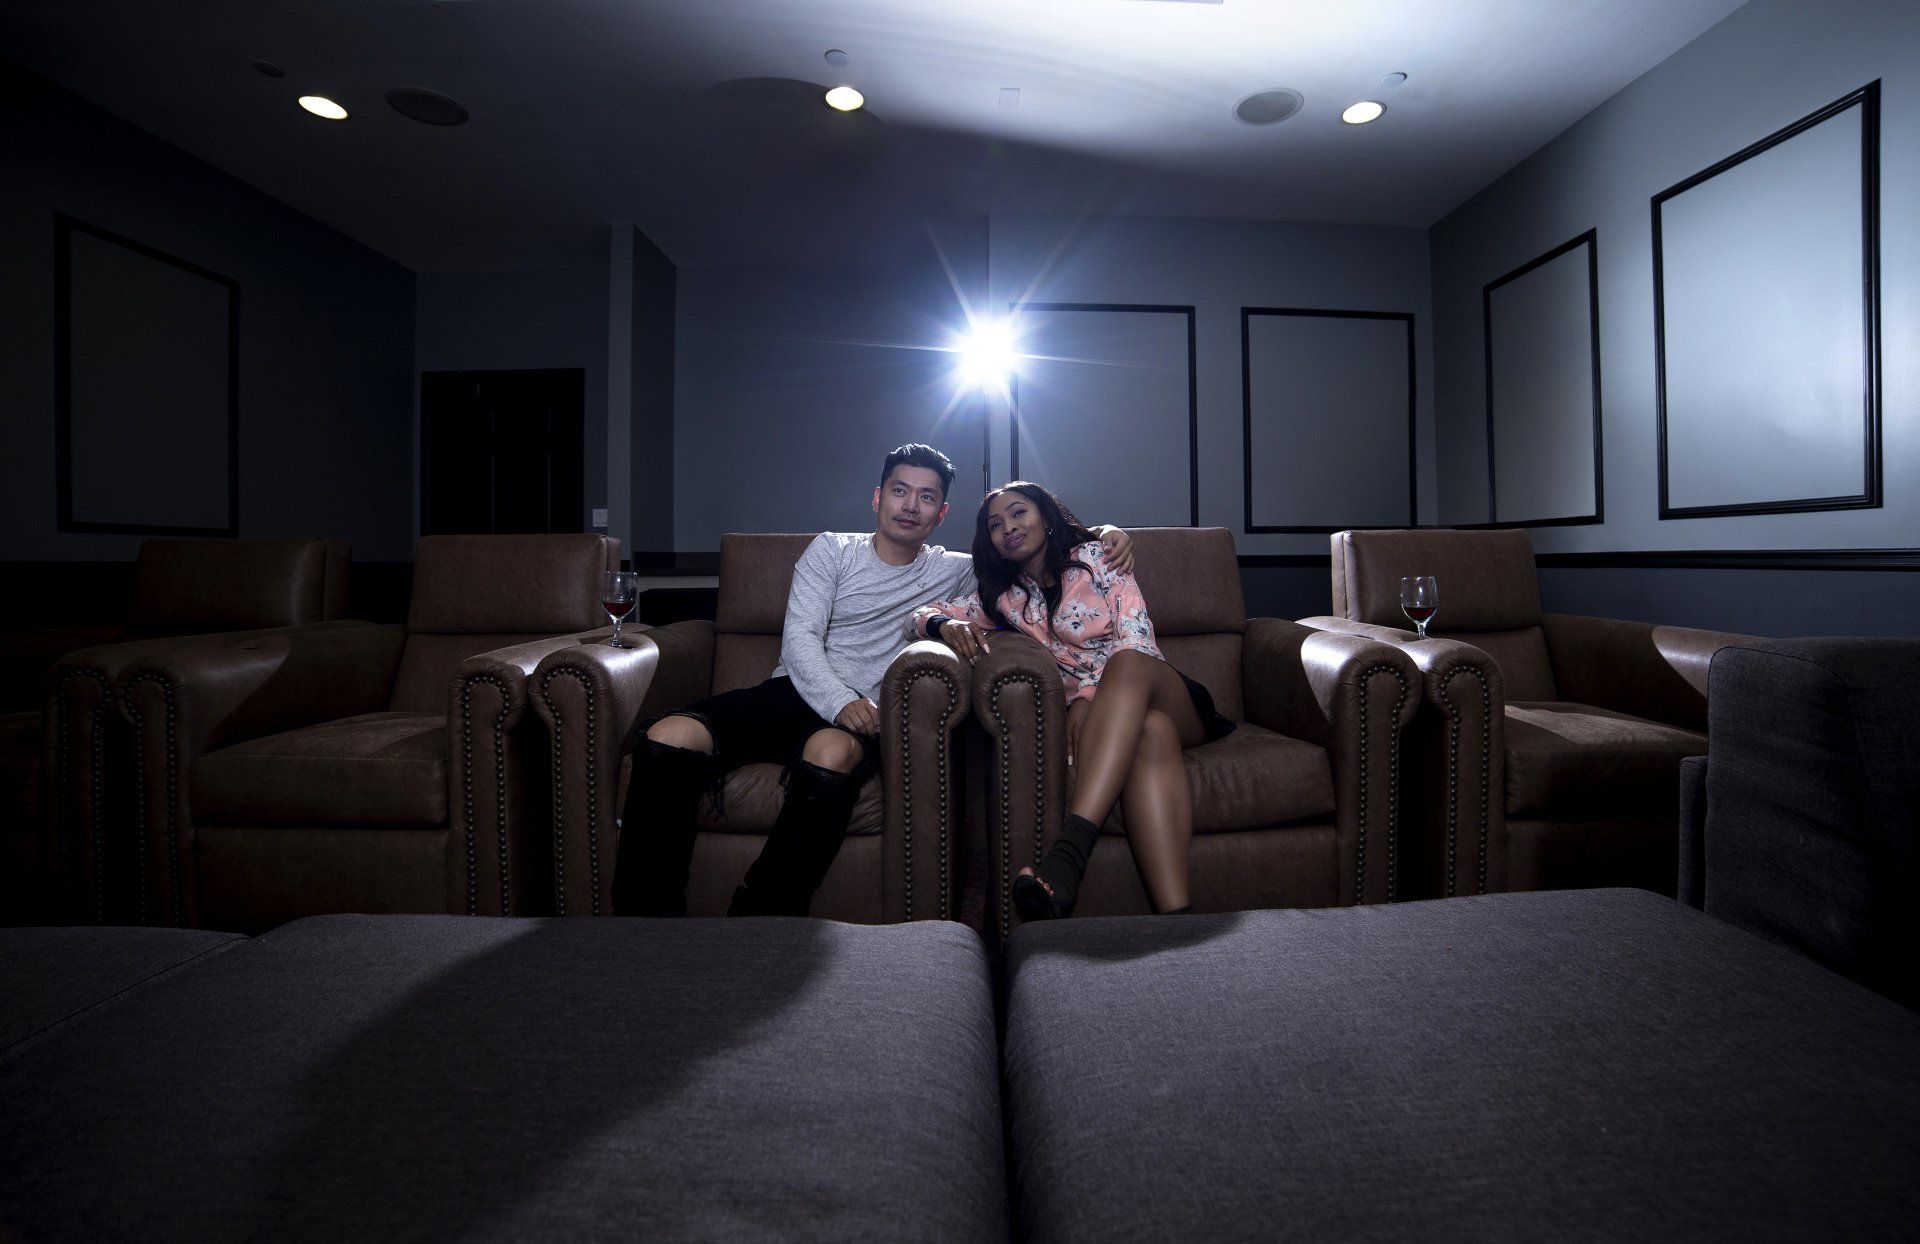 A photograph of a male and female young couple, sat on some leather sofas in a private home cinema, watching a movie